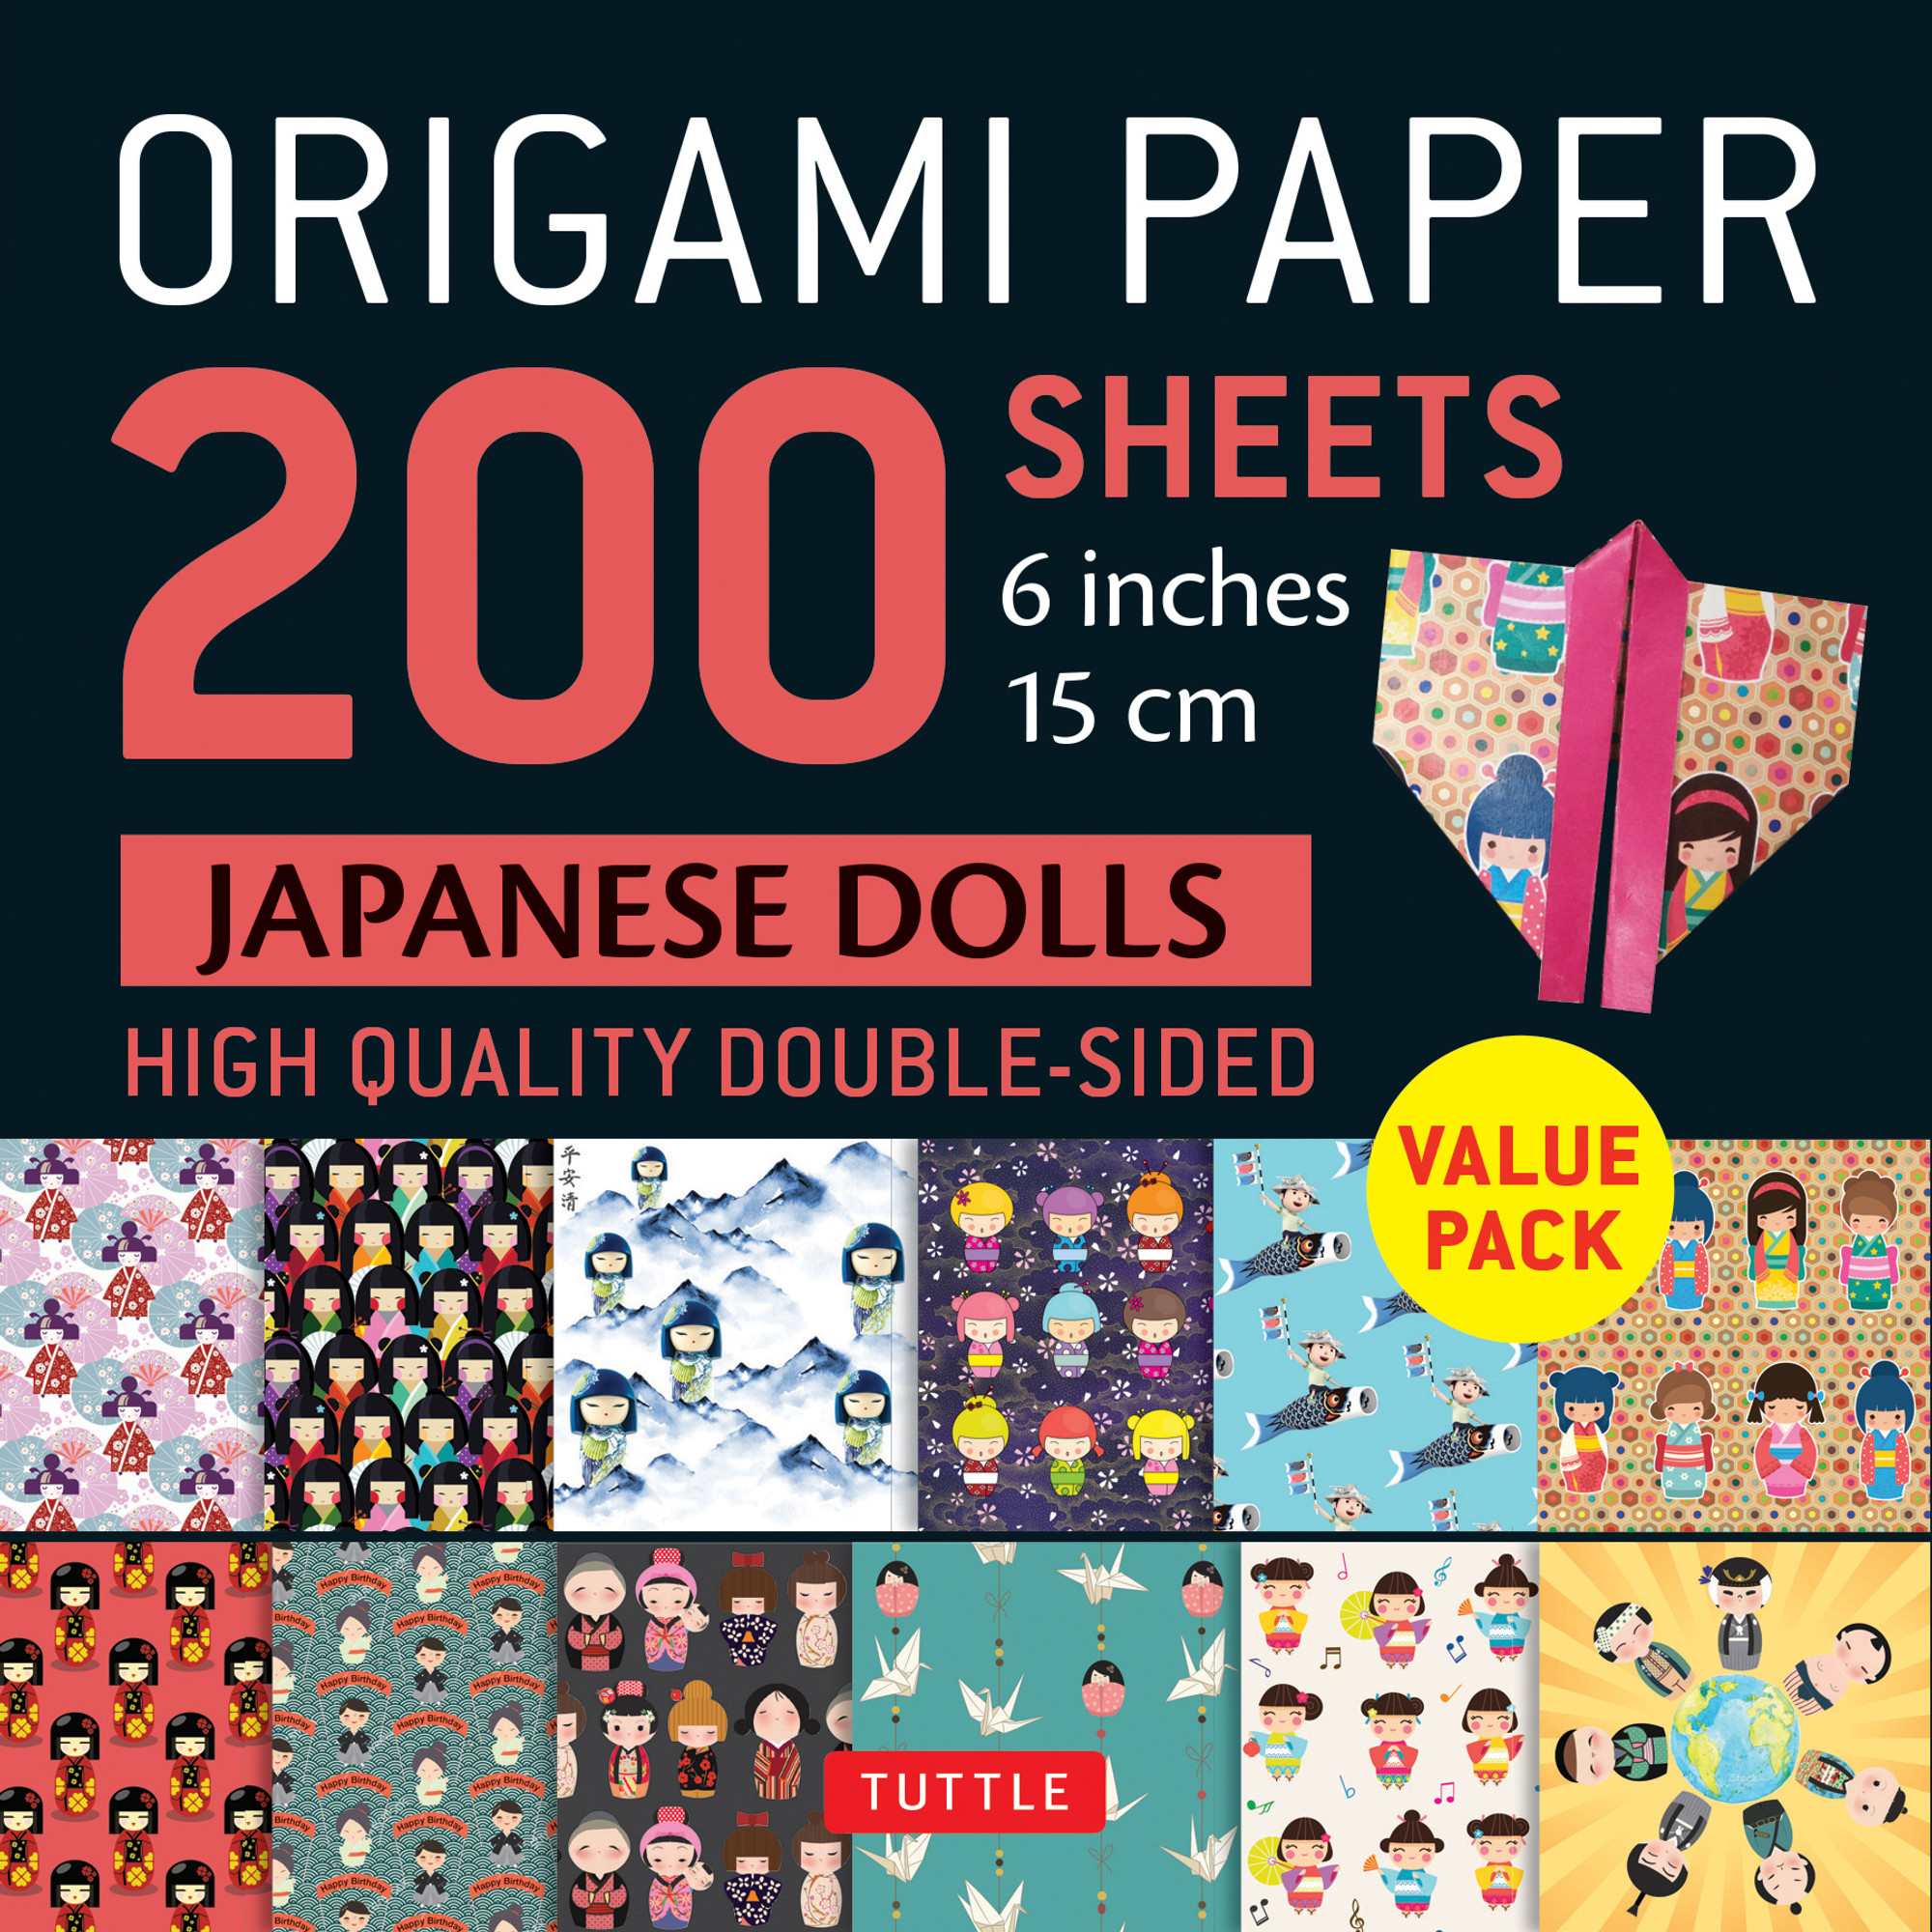 Chiyogami Patterns Gift Wrapping Paper - 24 Sheets (9780804852111) - Tuttle  Publishing